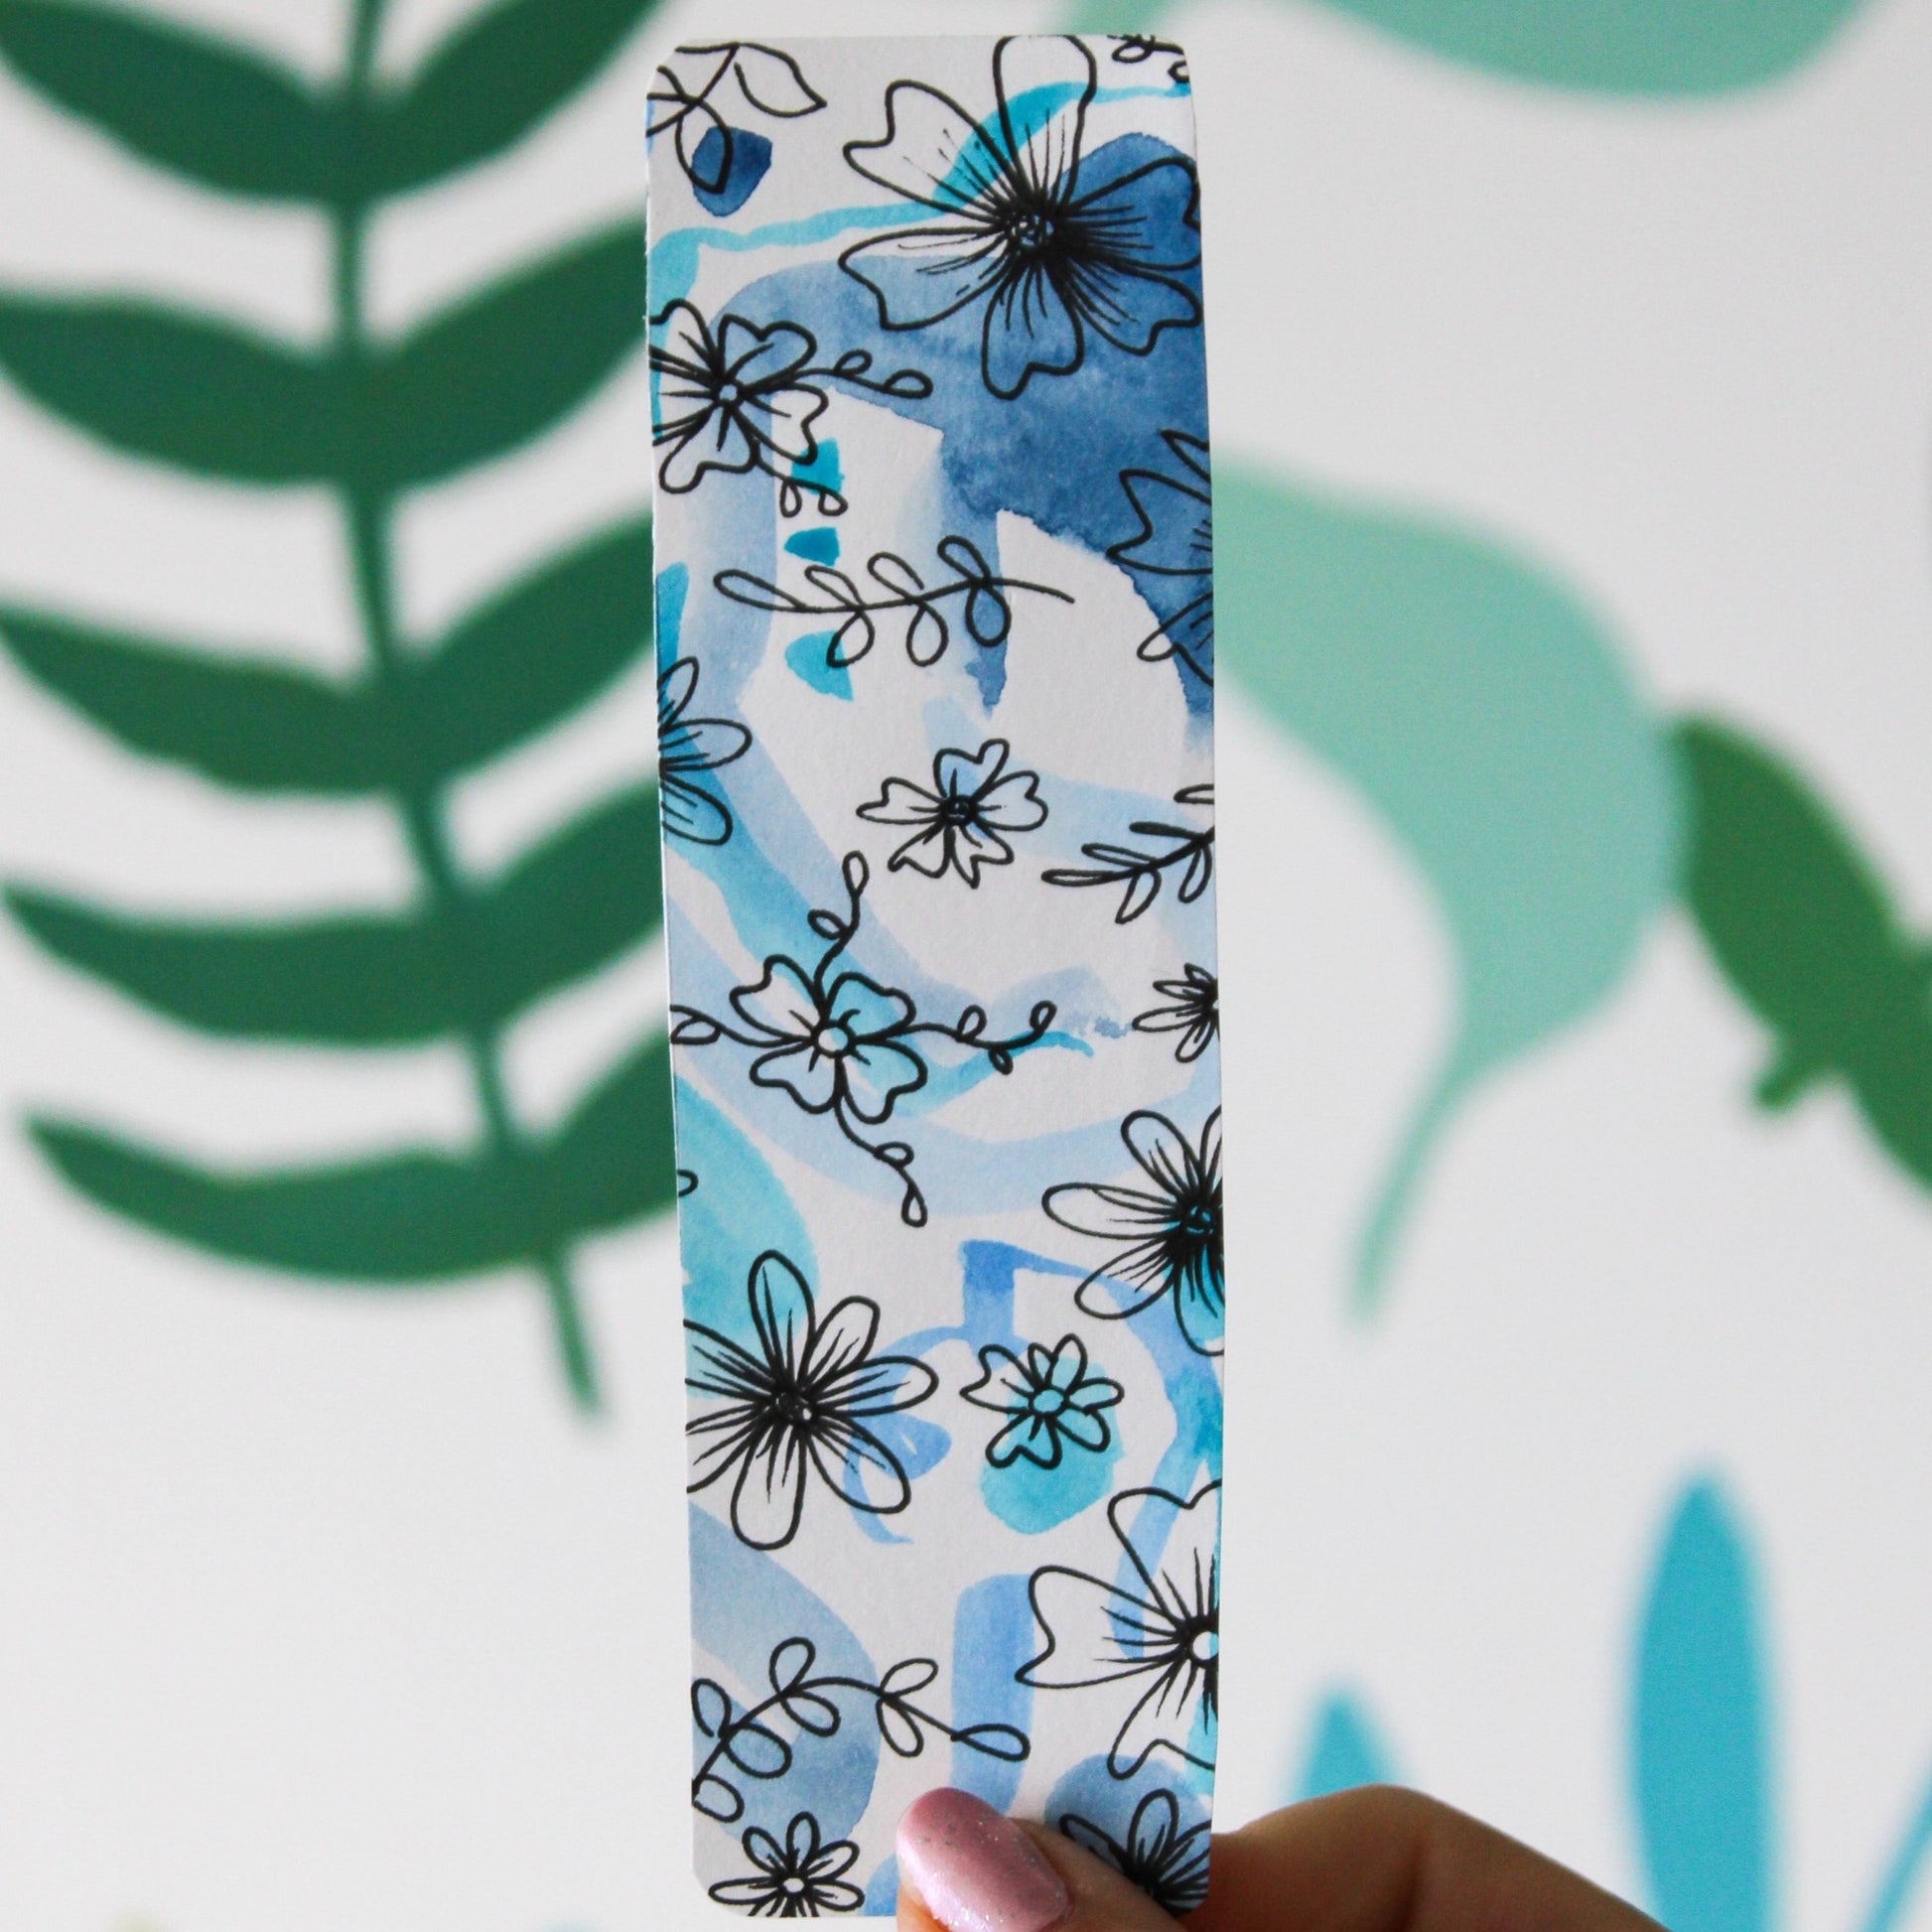 A blurred leaf pattern background. In the front is a hand holding a white and blue watercolour bookmark with black flowers and leaves drawn in ink.